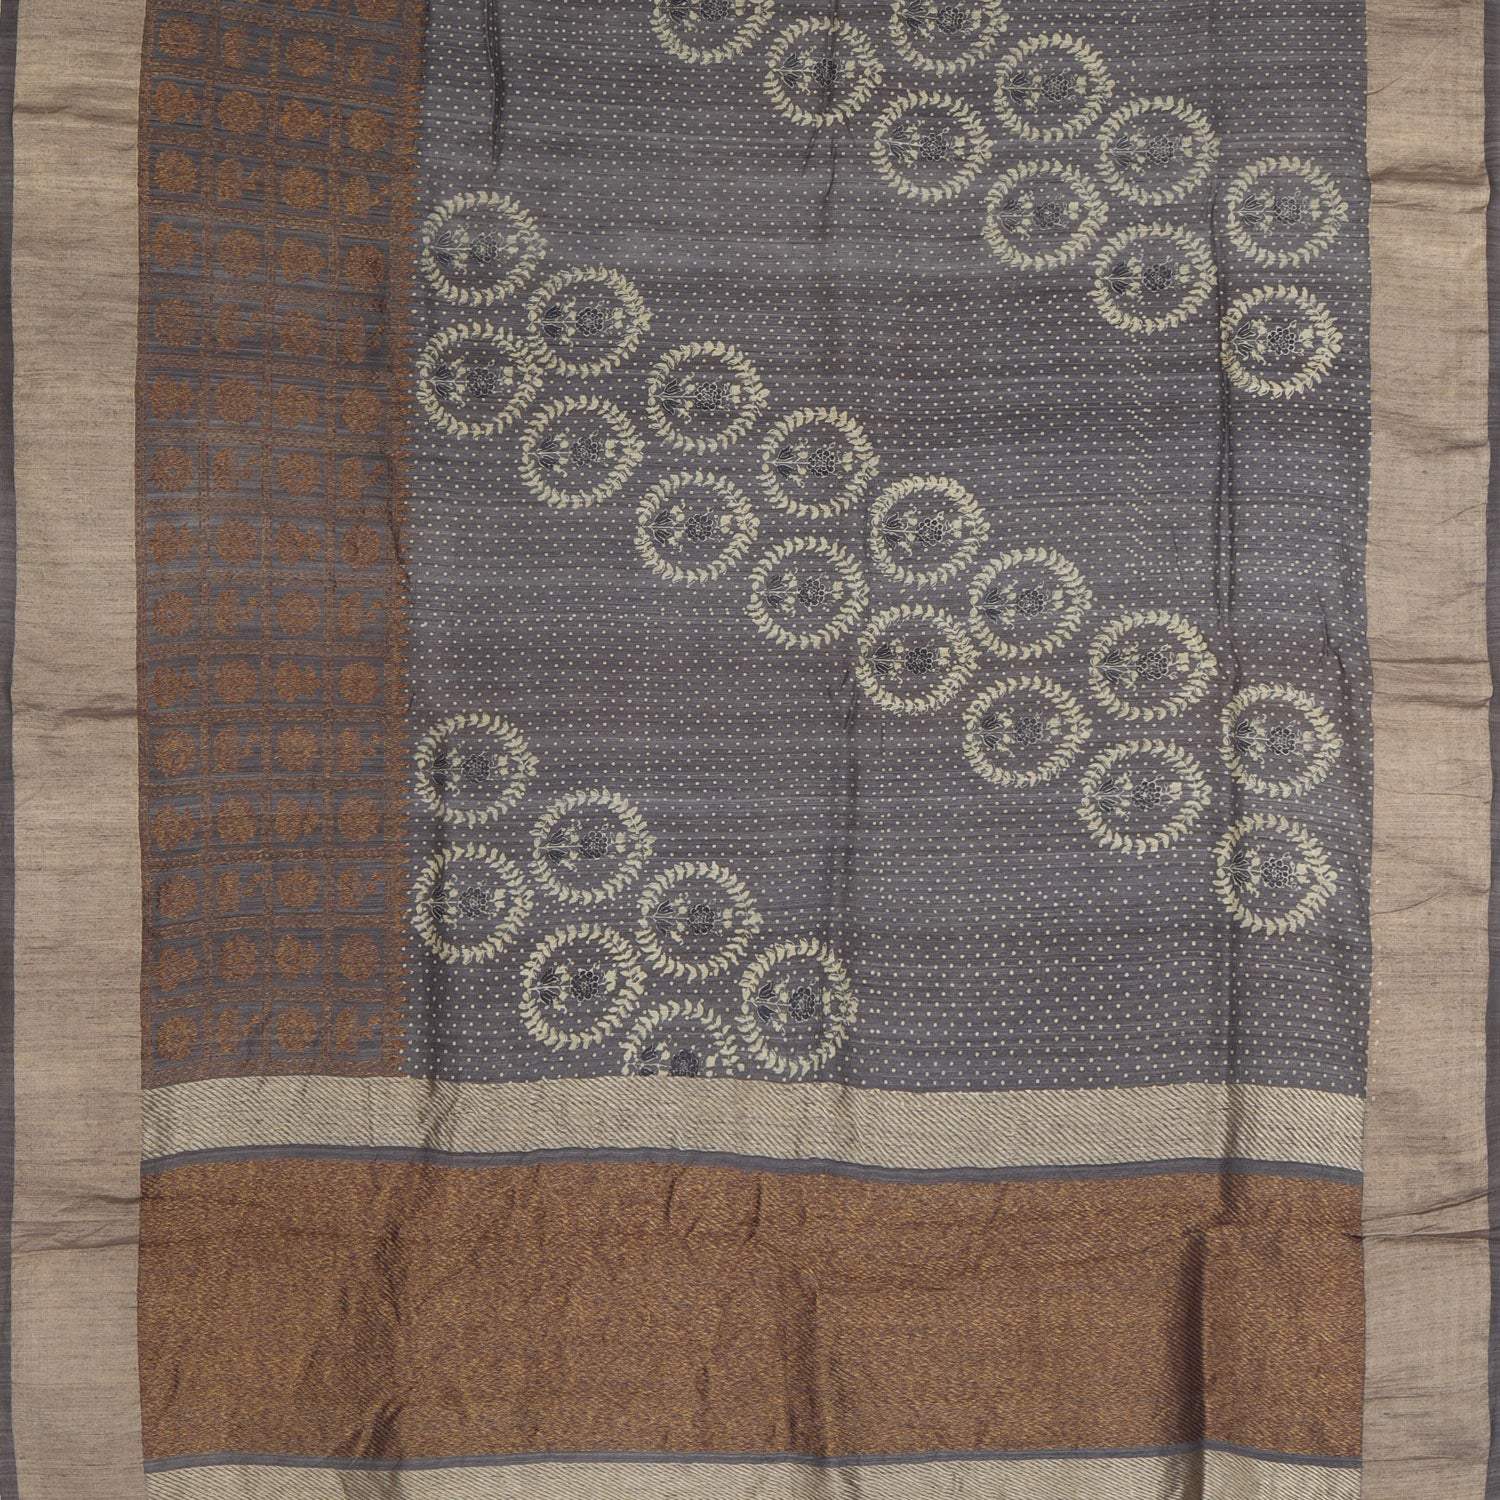 Earthy Grey Matka Saree With Printed Pattern - Singhania's